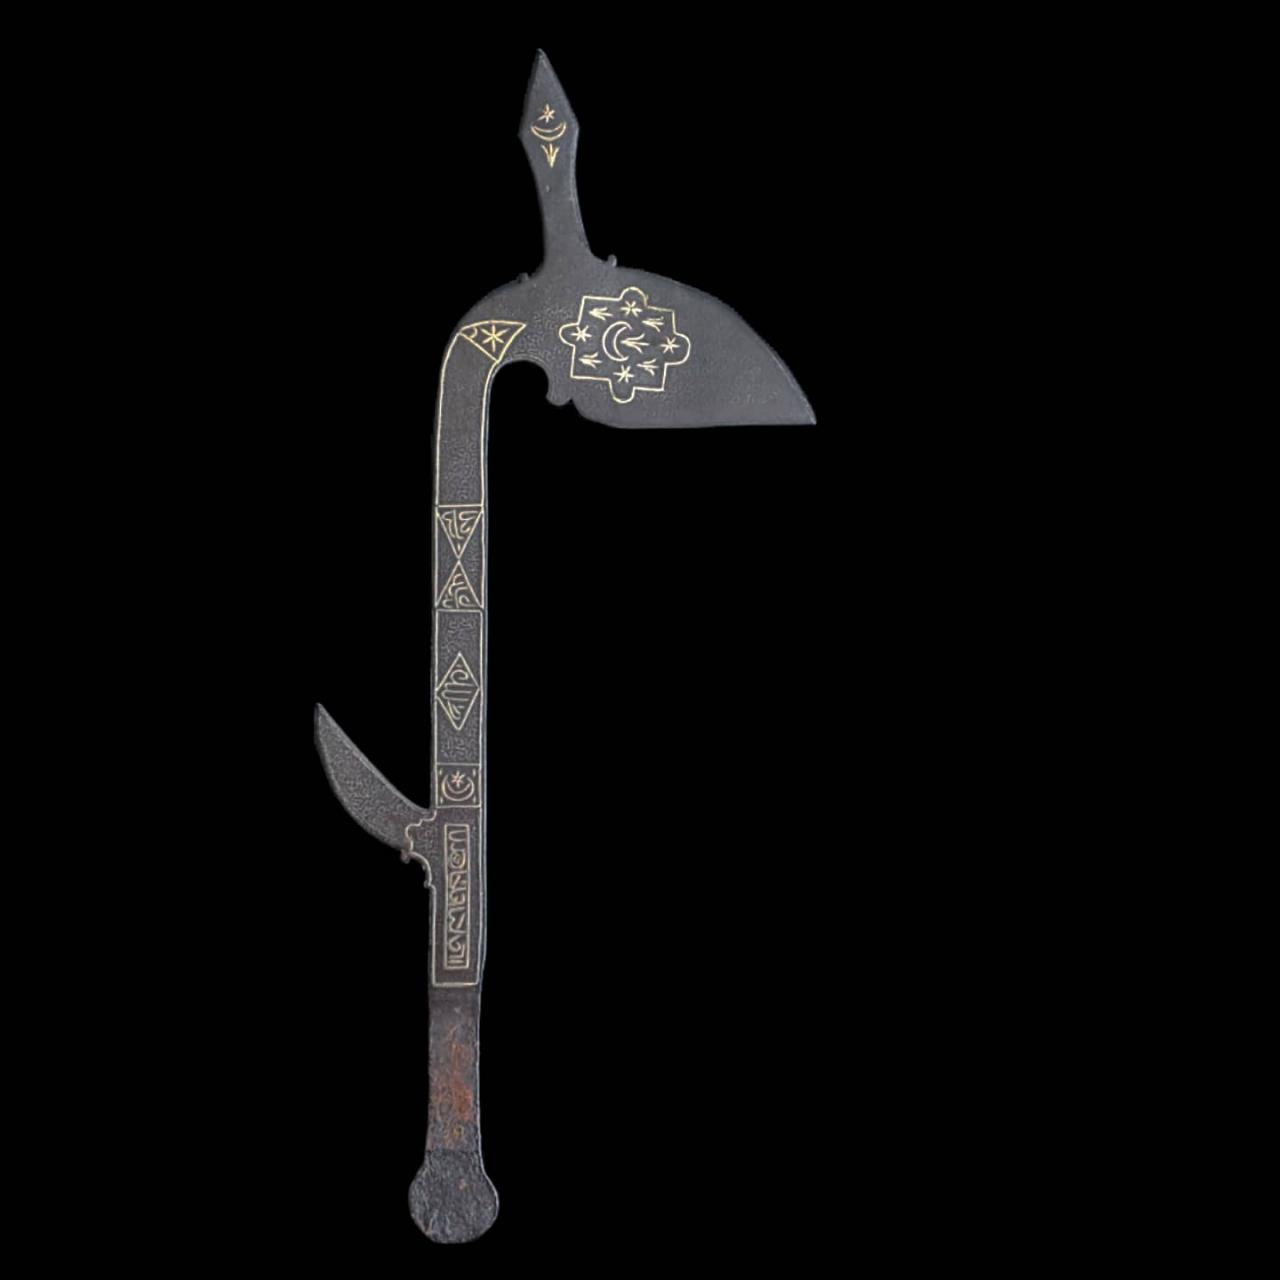 Sudanese spears of Mahdist Period 1881-1899 - Ethnographic Arms & Armour